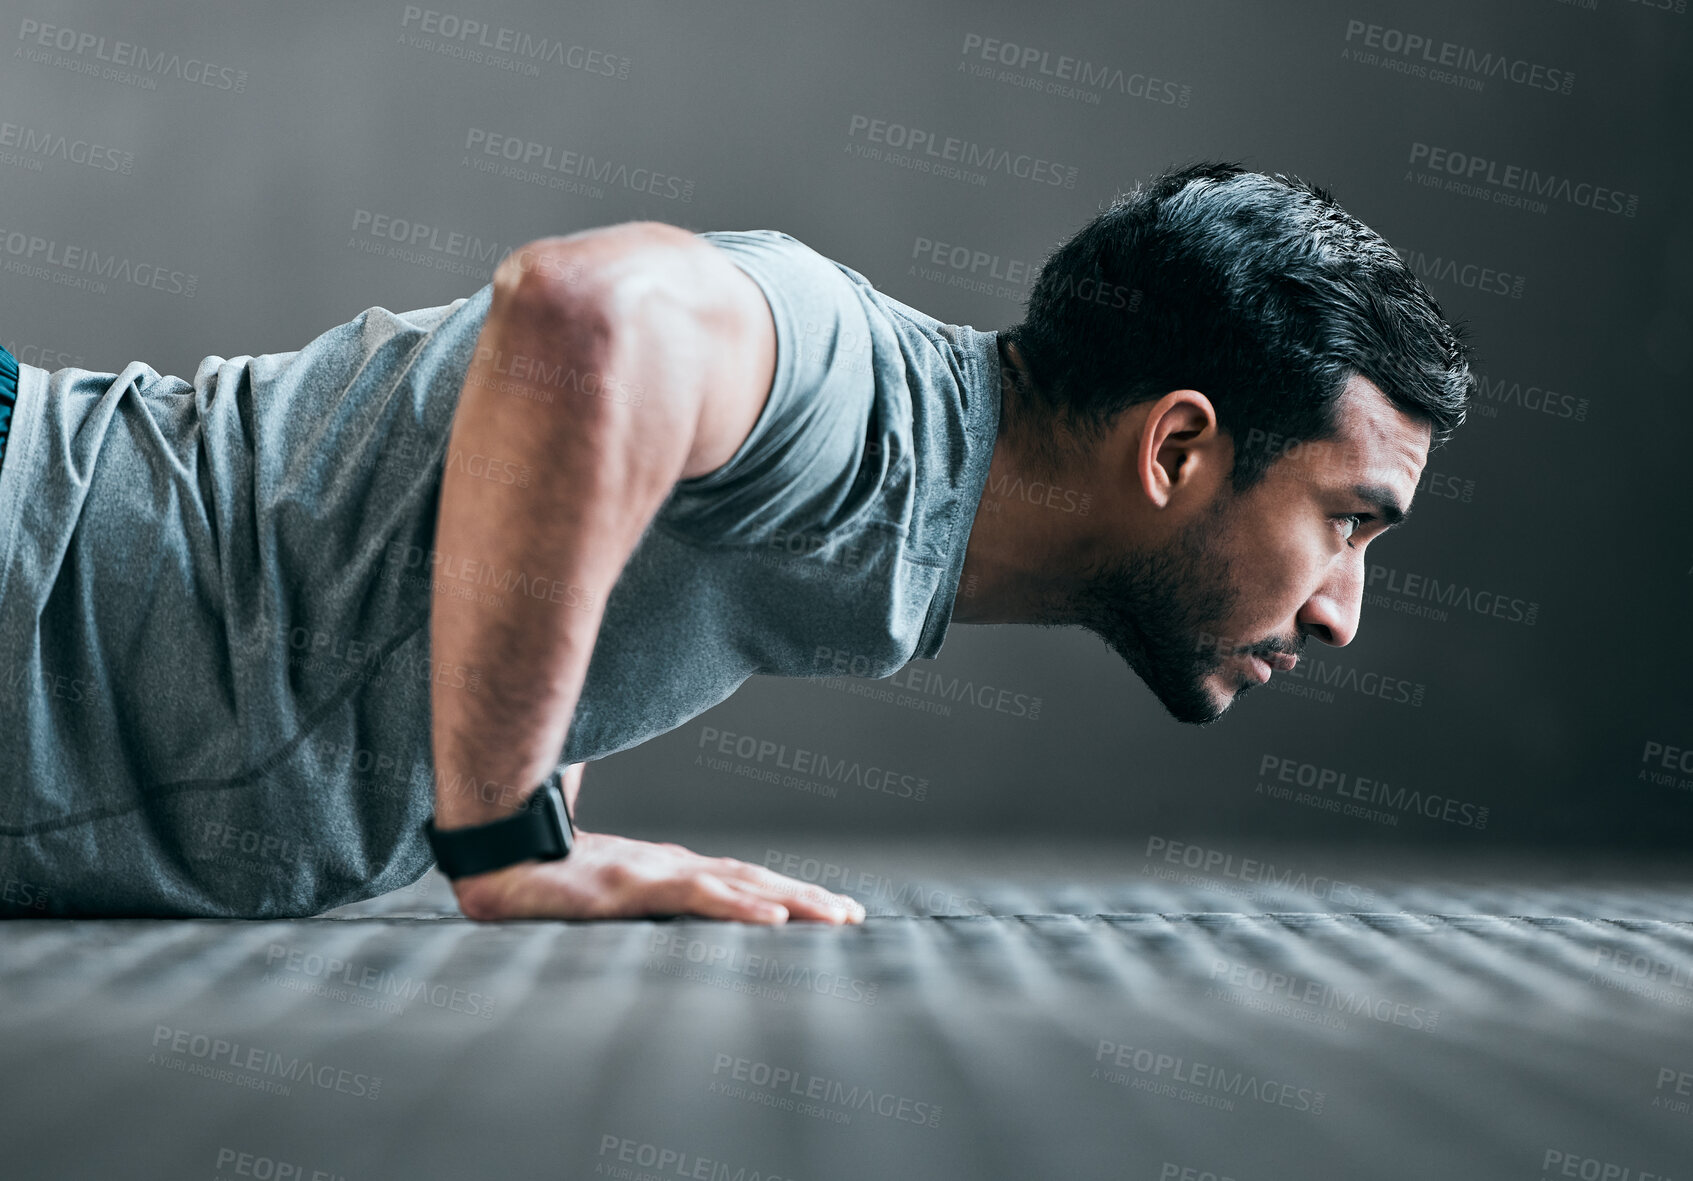 Buy stock photo Cropped shot of a handsome young male athlete doing pushups against a grey background